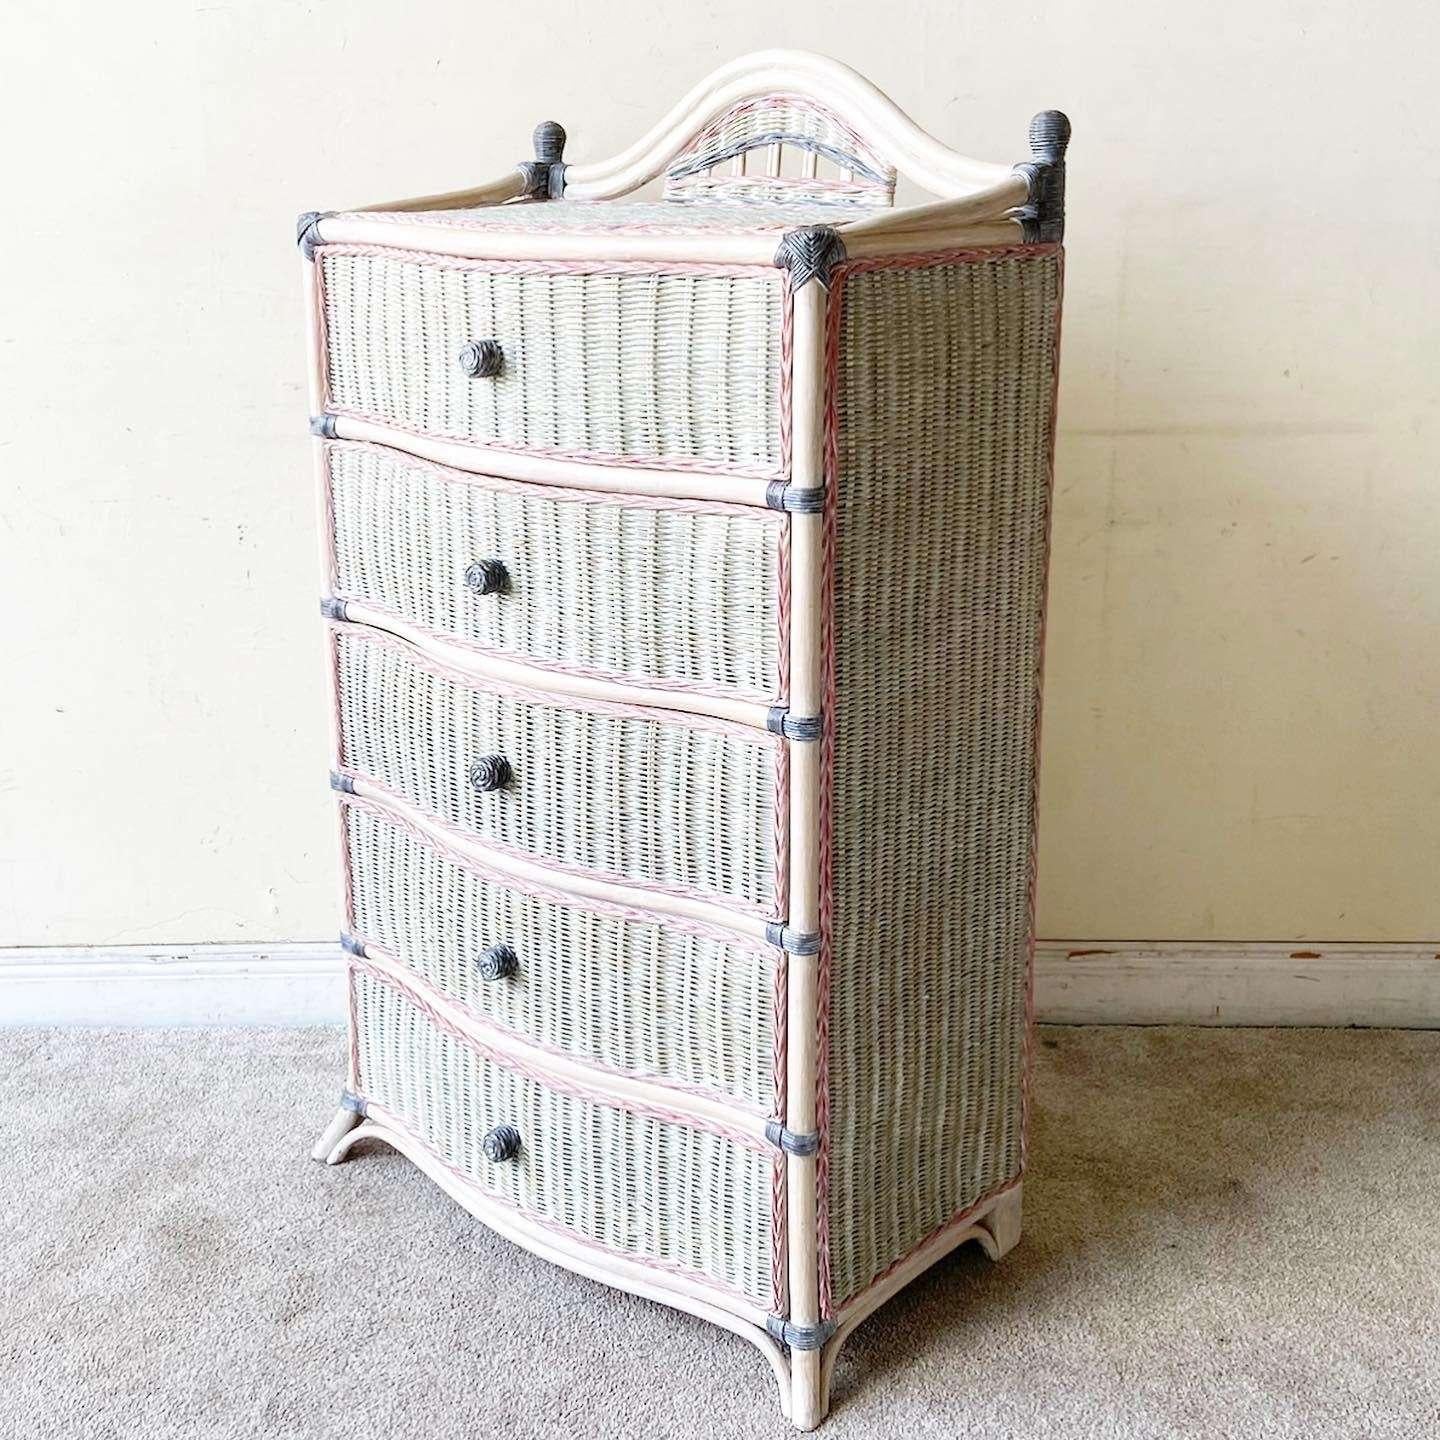 Exceptional vintage boho chic bamboo rattan and wicker Highboy dresser. Features an off white and pink finish with kindred gray accents and 5 spacious drawers.
